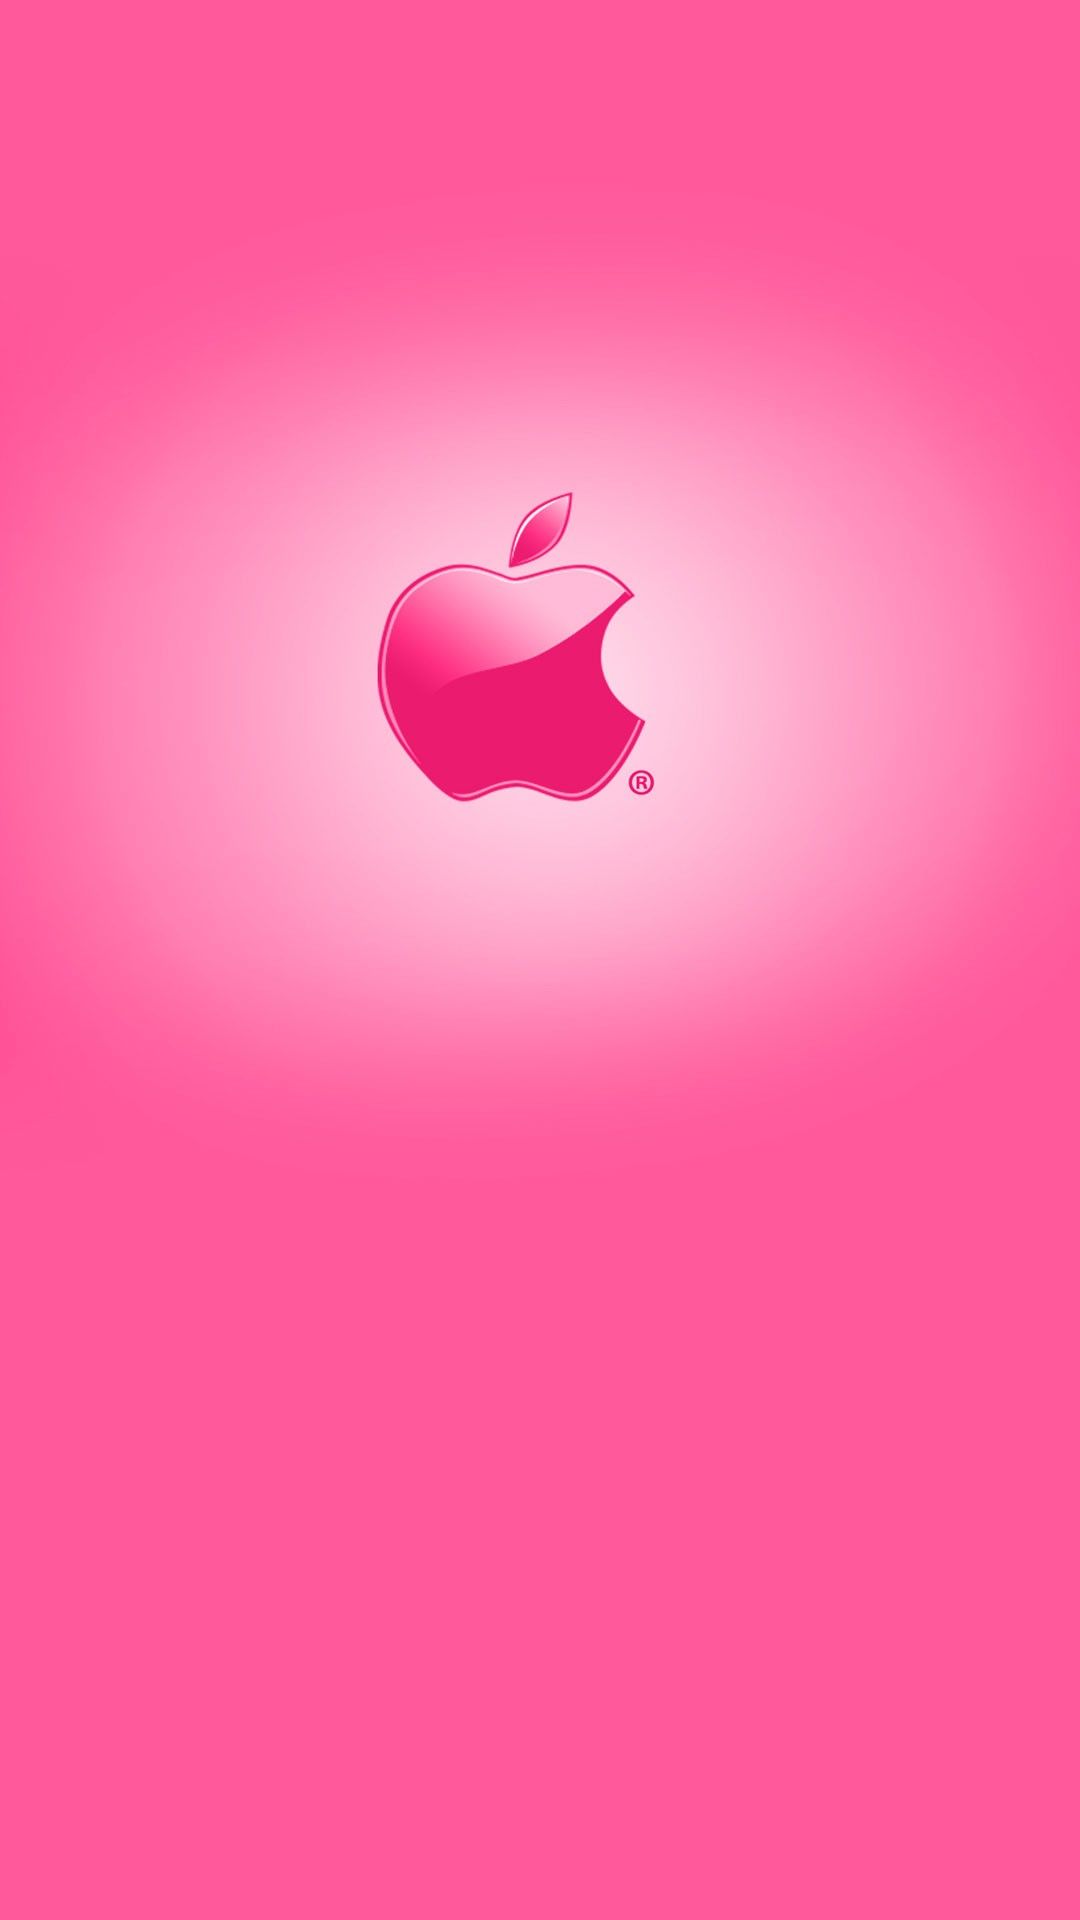 Pink Apple Wallpaper For Android Android Wallpaper. Pink wallpaper iphone, iPhone wallpaper girly, Apple logo wallpaper iphone